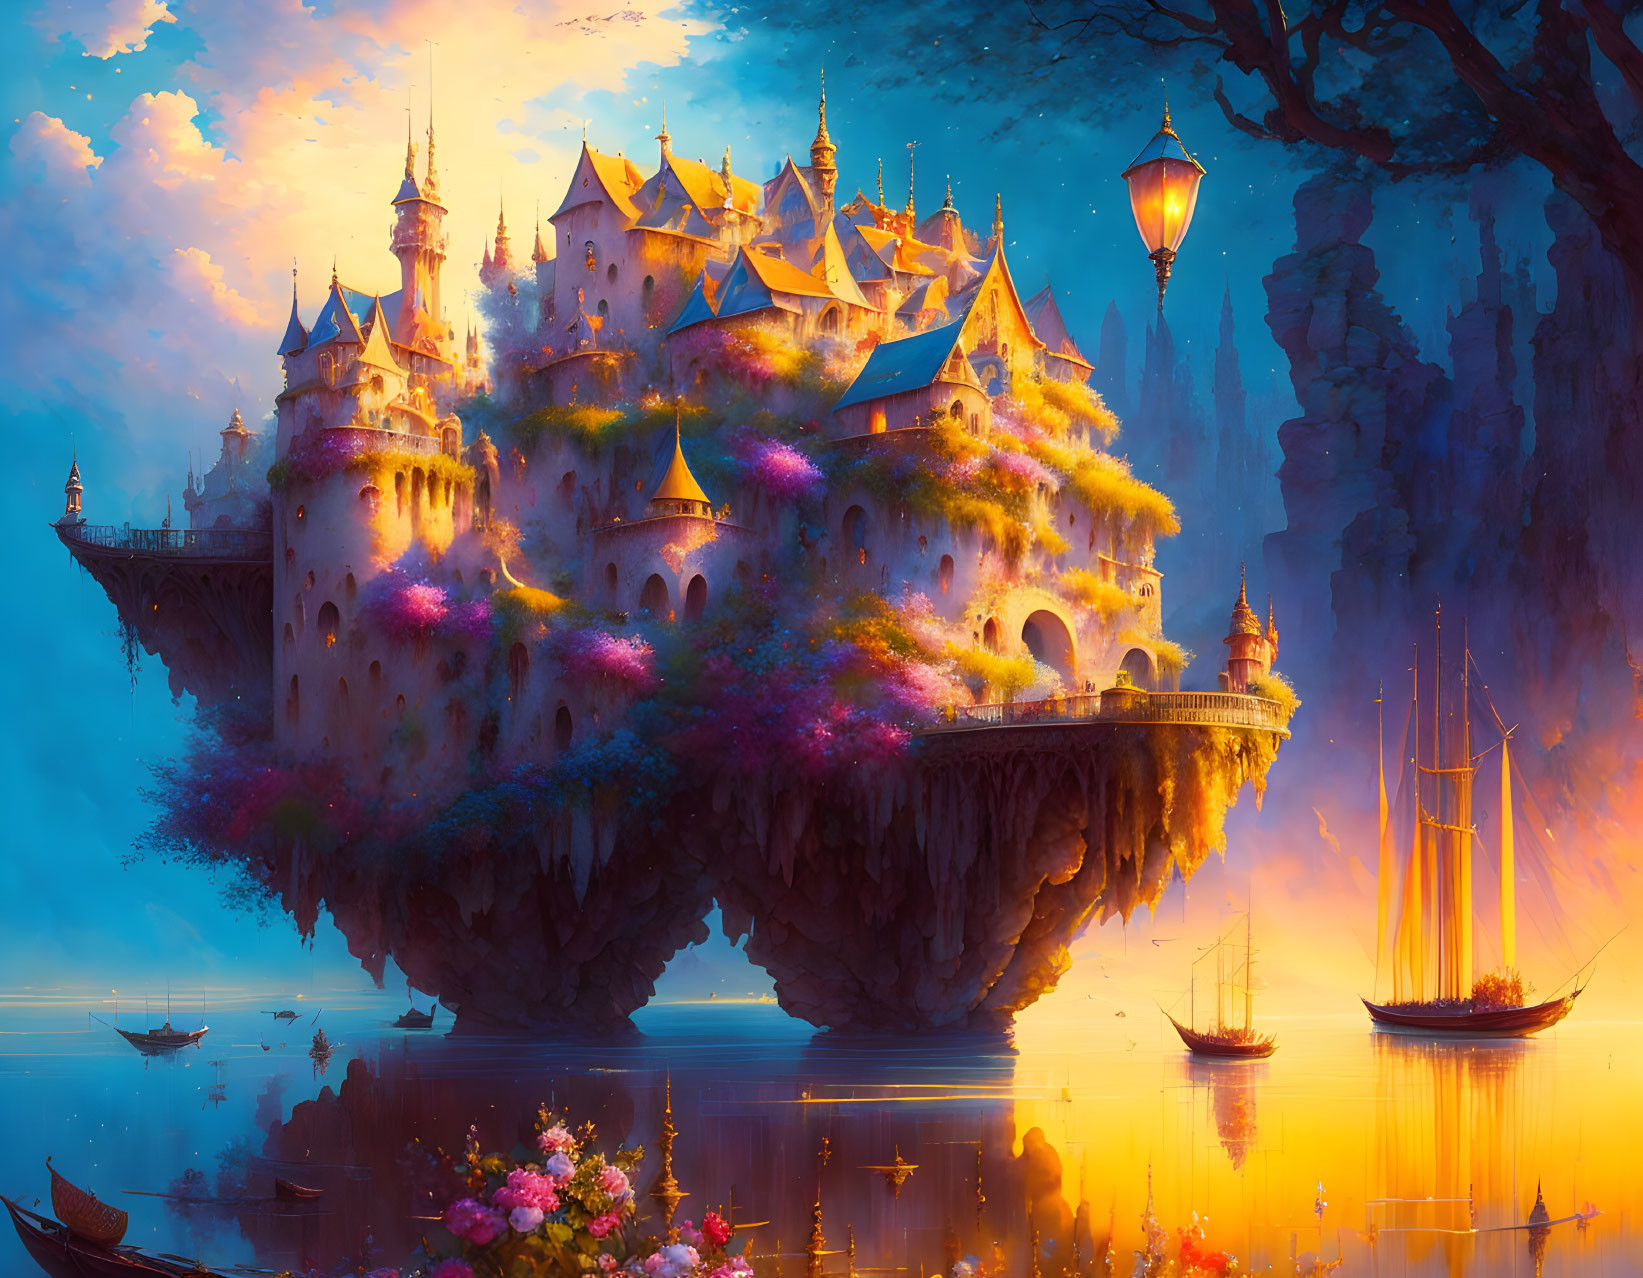 Fantastical floating castle at sunset with vibrant flora and boats on calm waters in dream-like scene.